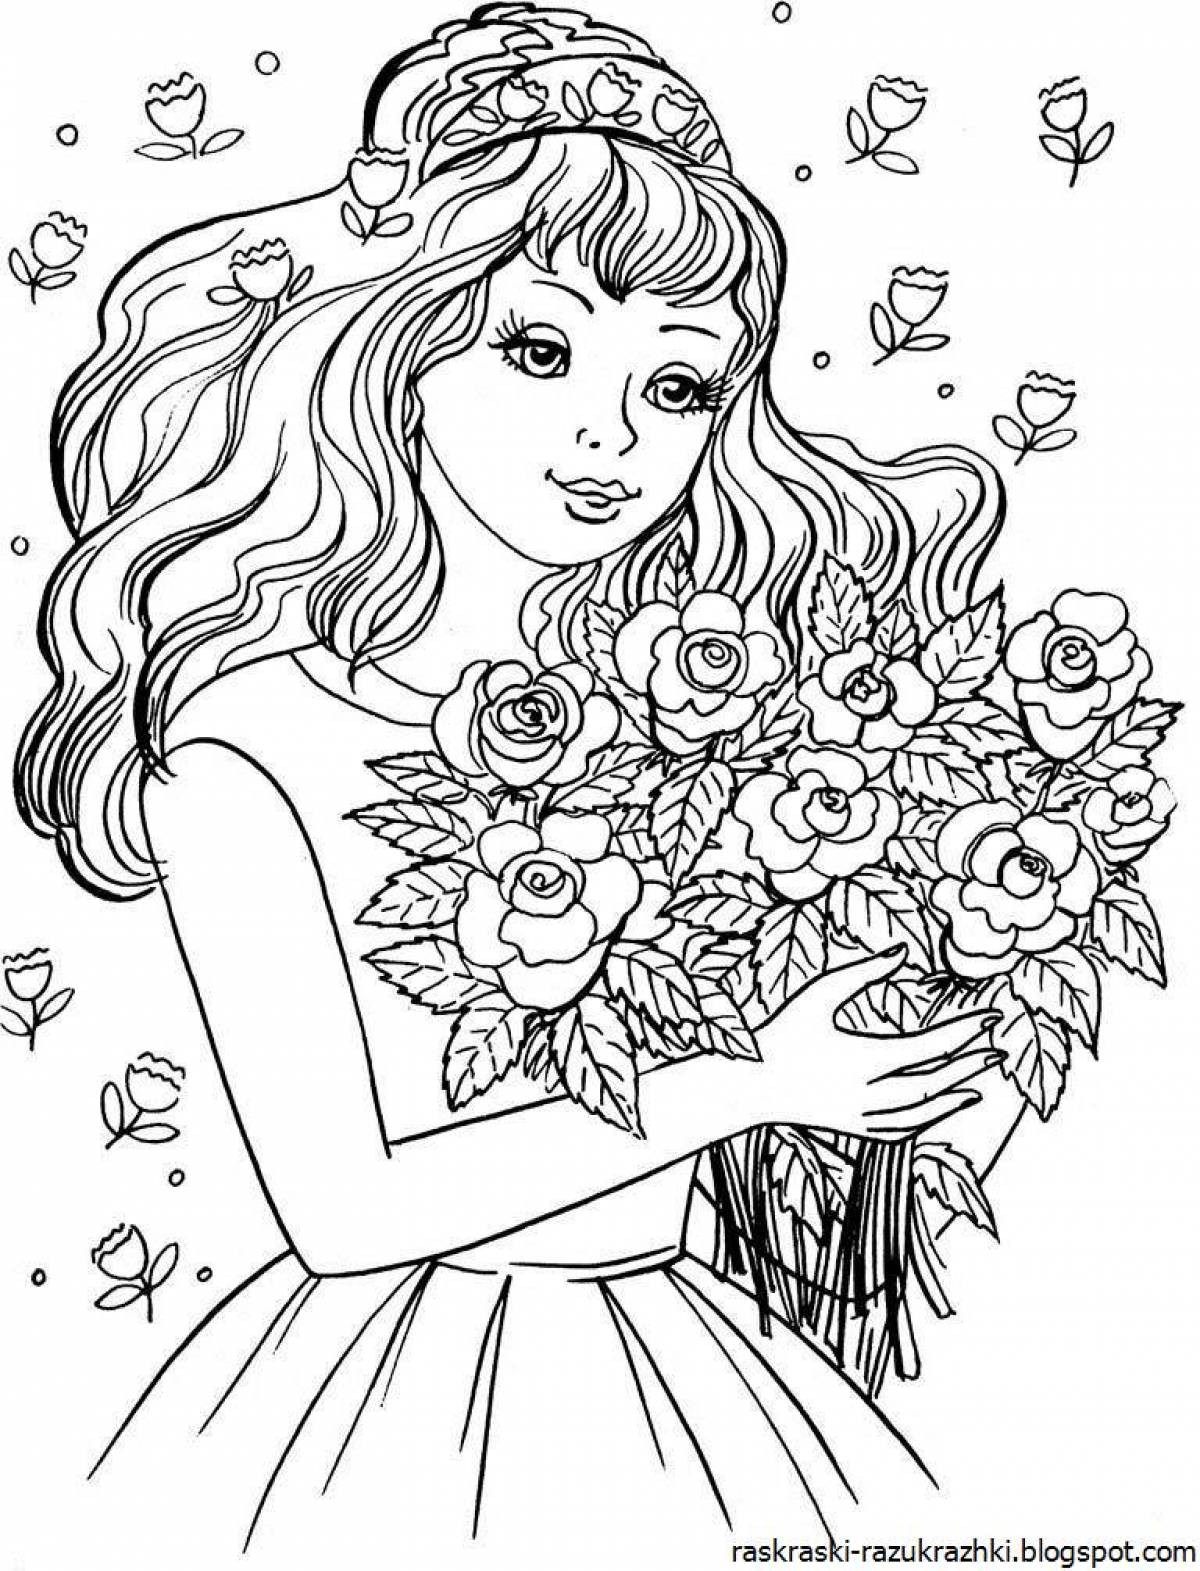 Coloring book for girls 10 years old